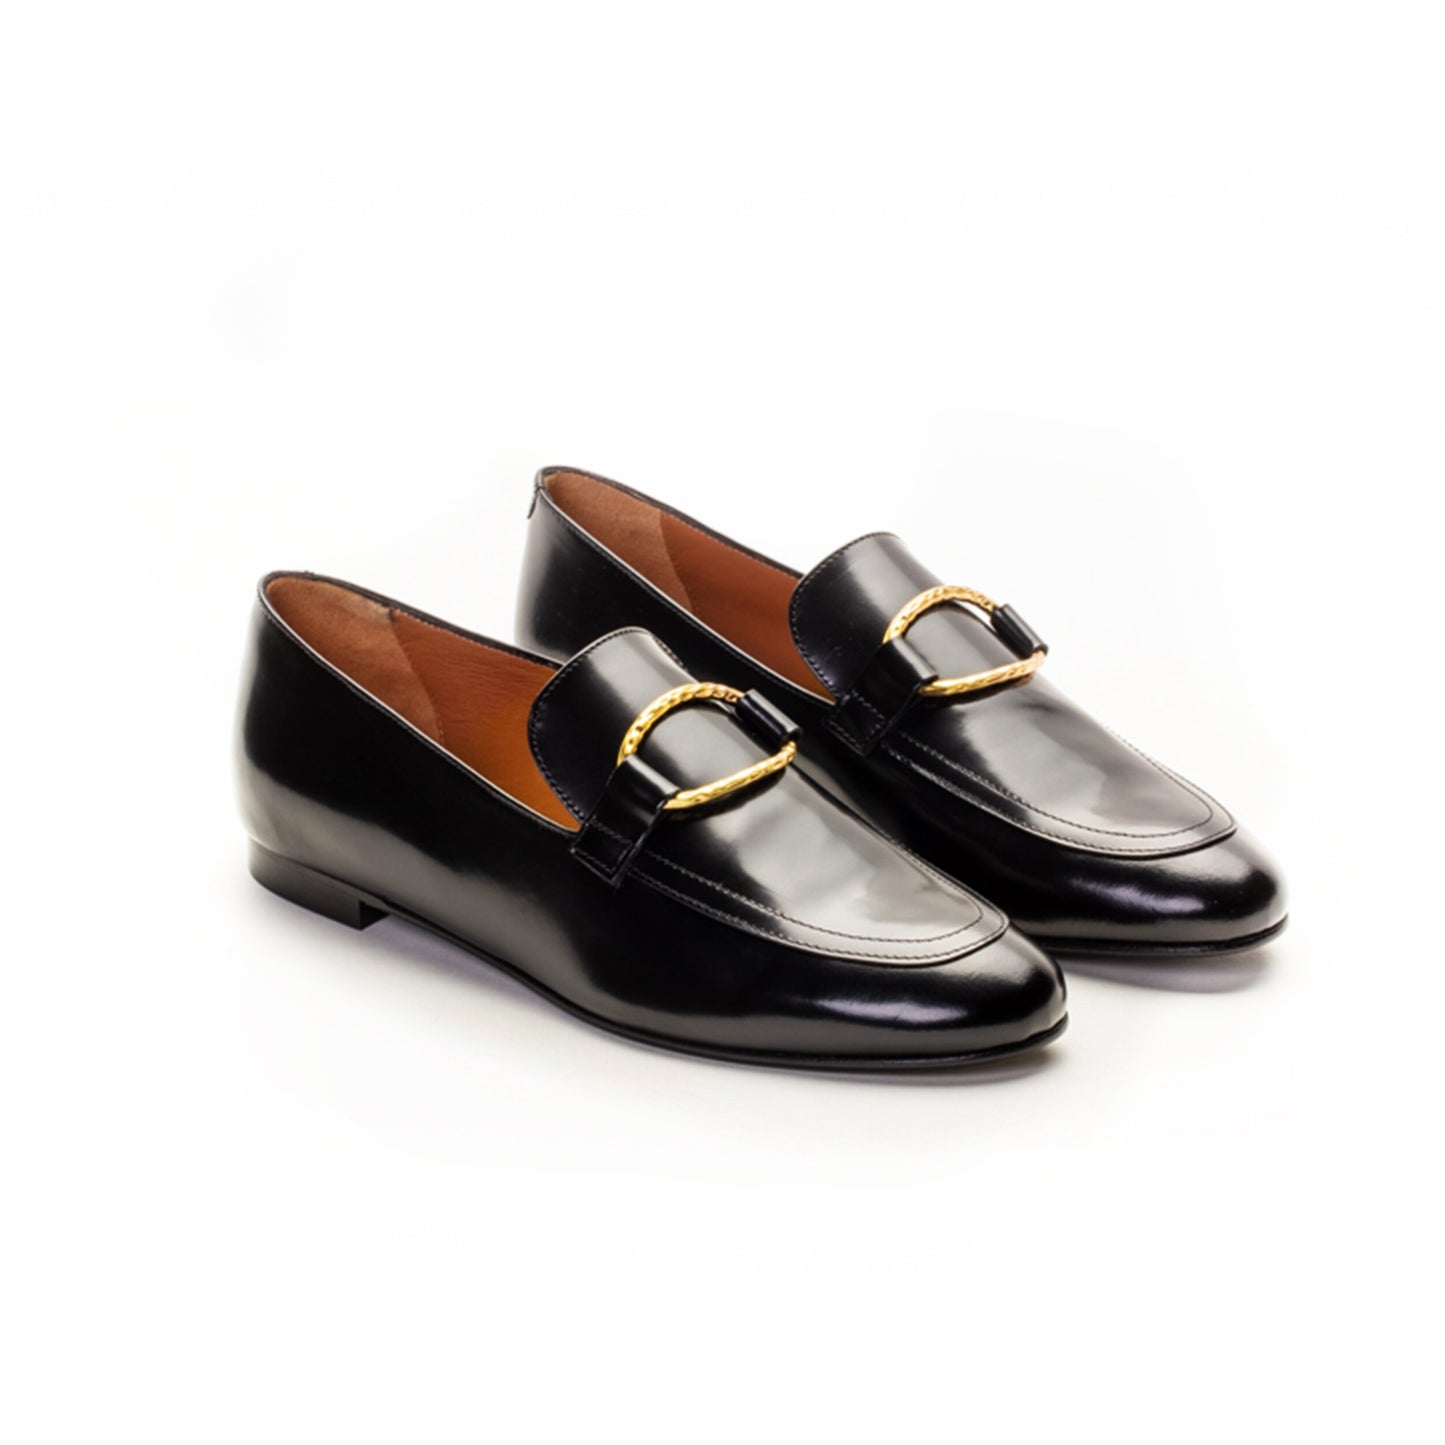 Black Tomboy Chic Loafers